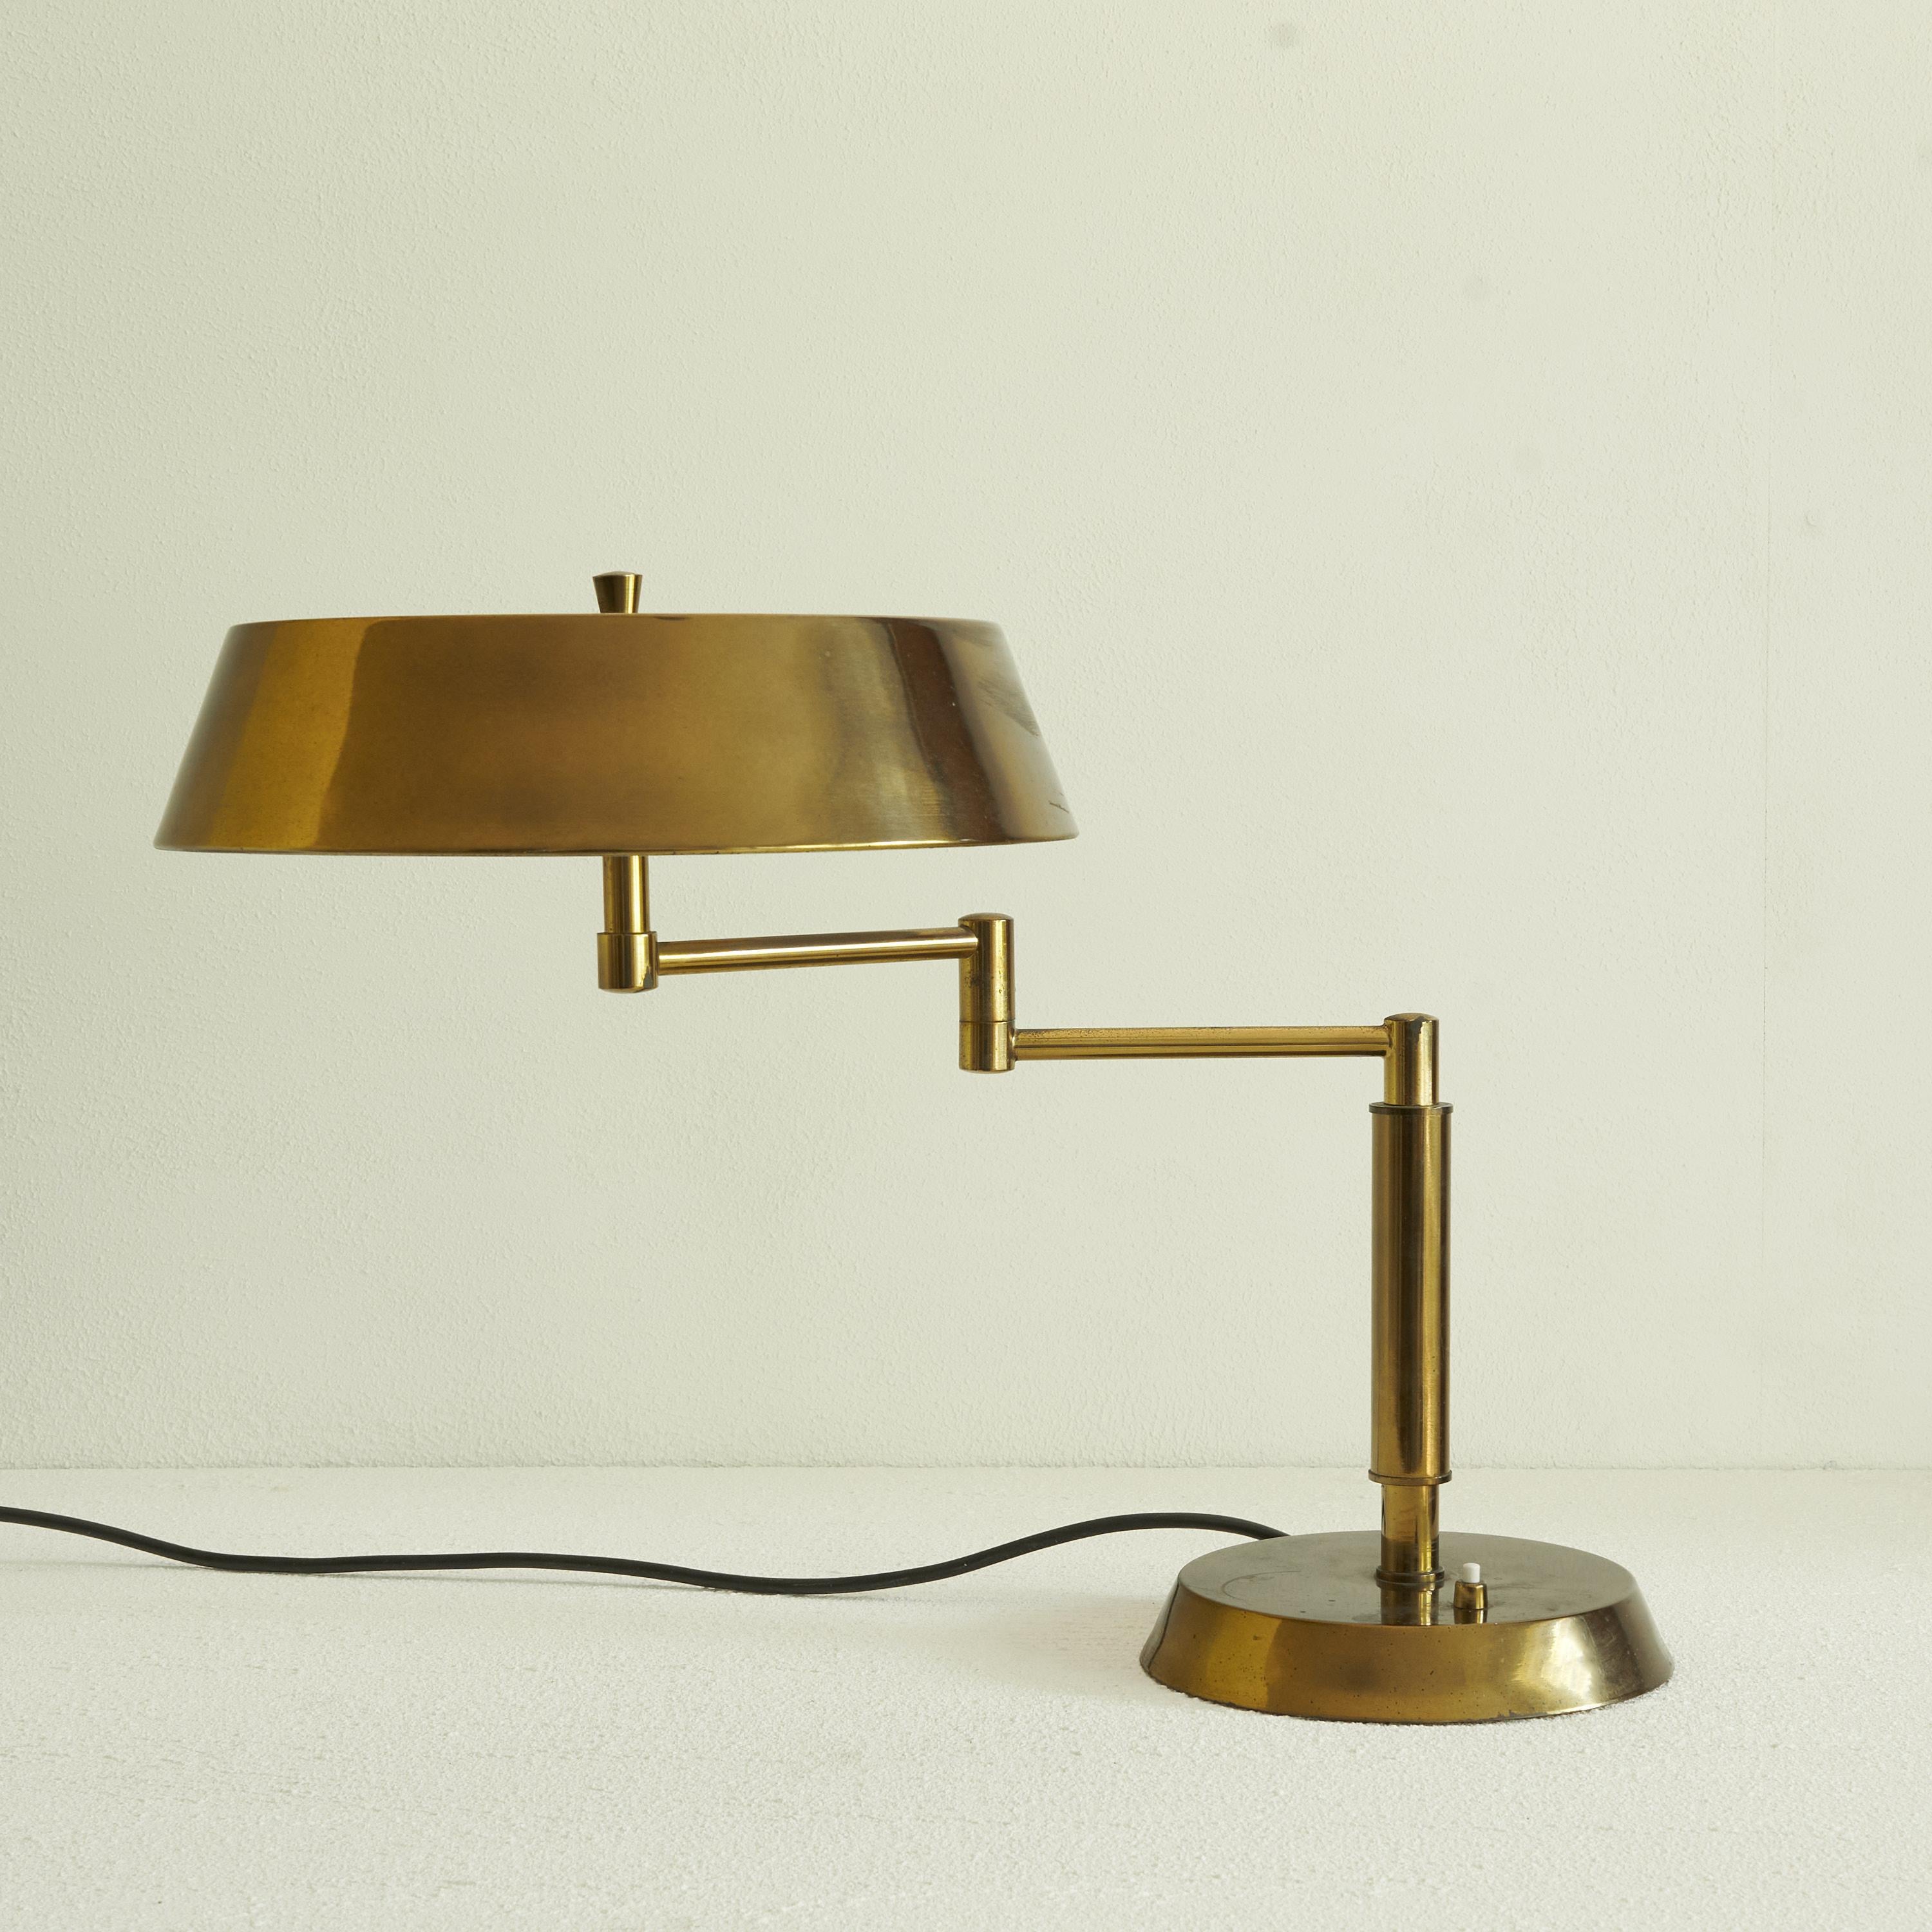 20th Century Articulating Table Lamp in Patinated Brass, 1960s For Sale